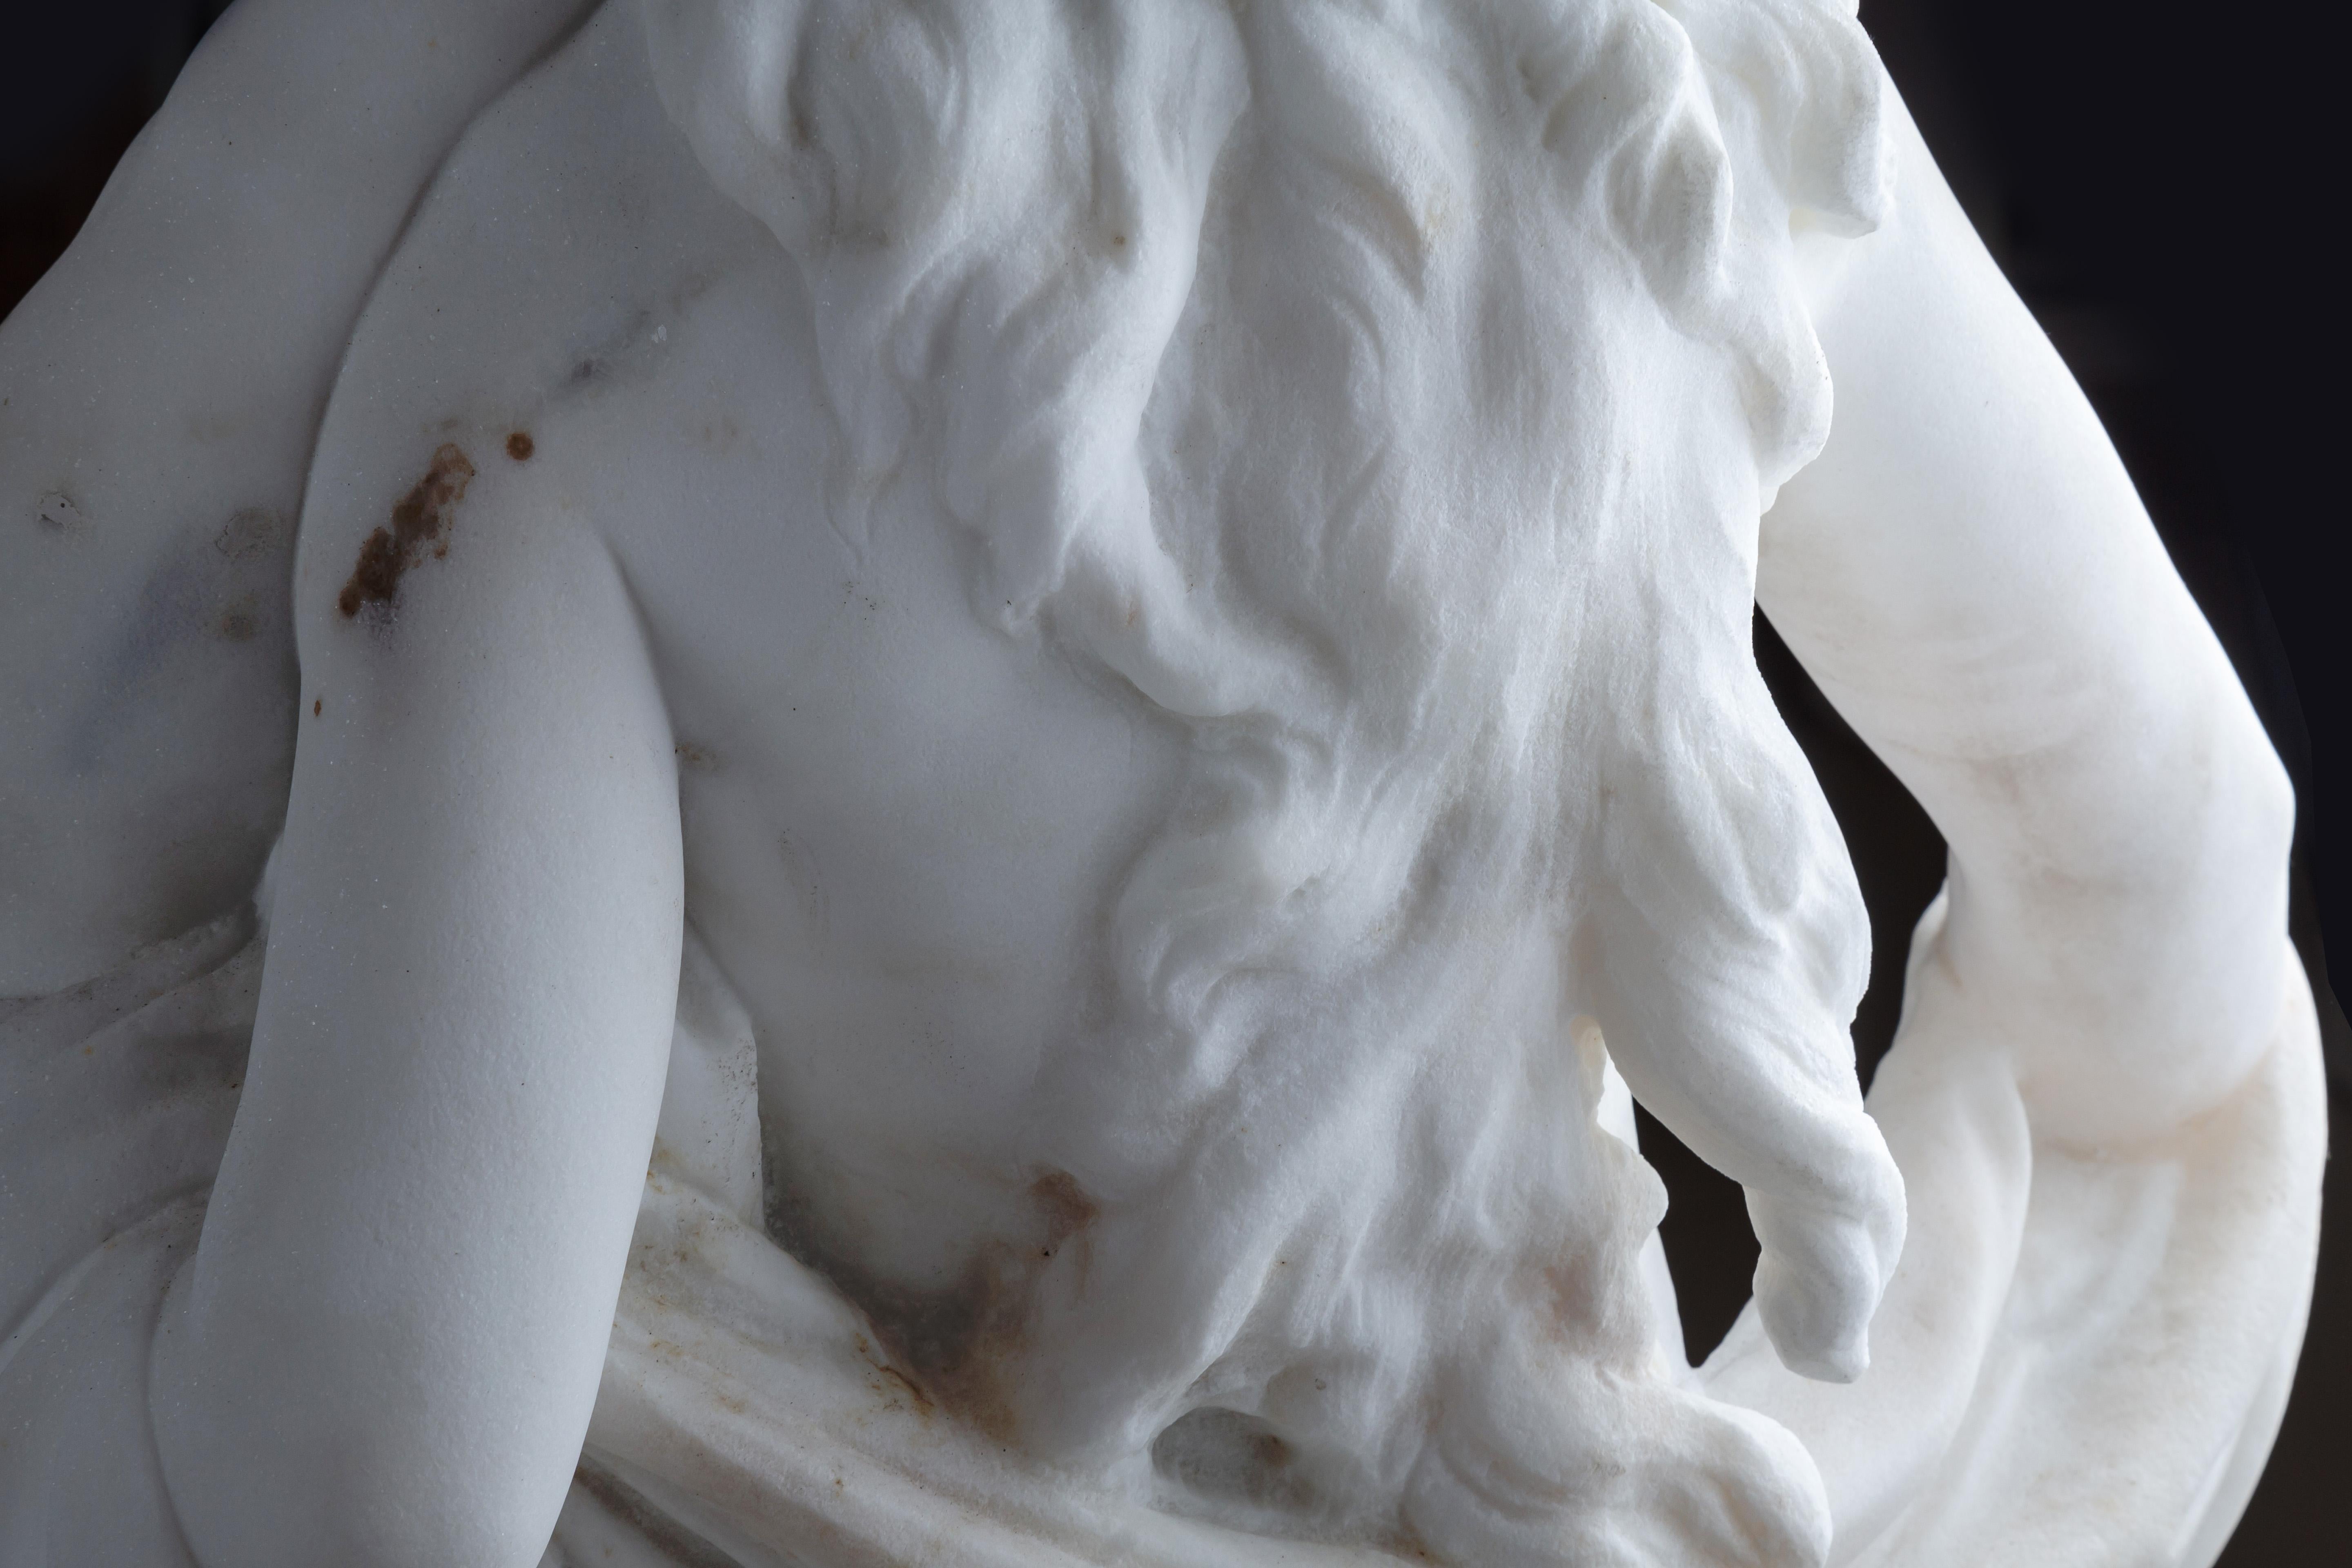 Le Retour des Champs ‘Return from the Harvest’ Carrara Marble, Signed and Dated 10